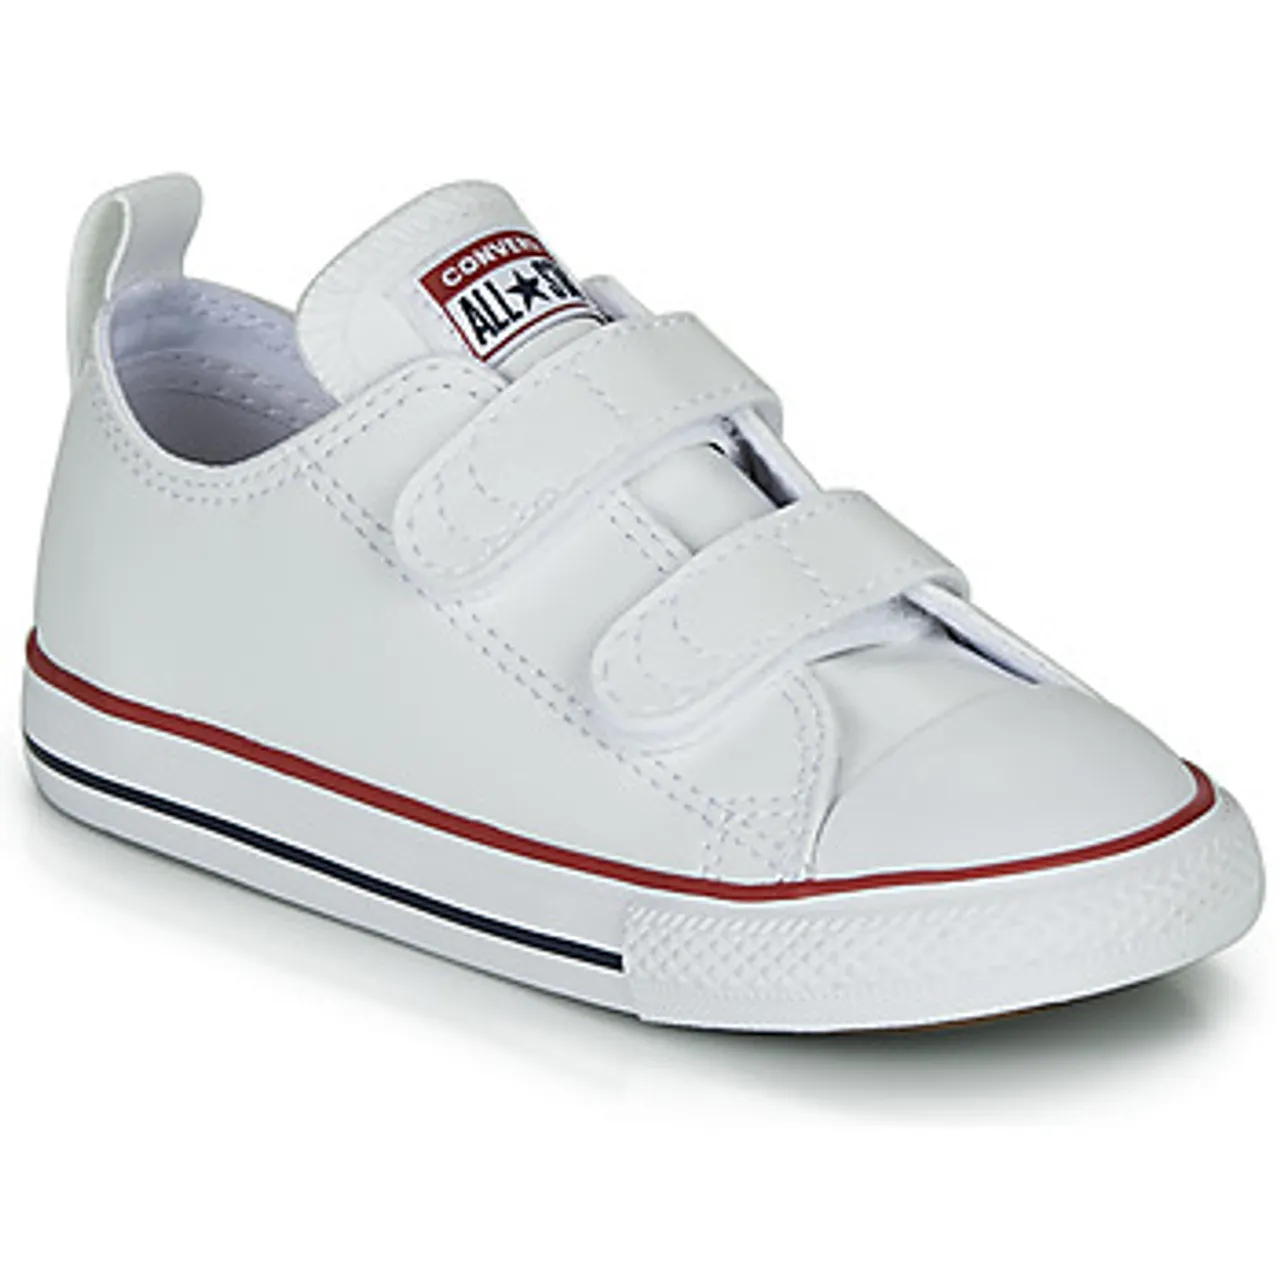 Converse  CHUCK TAYLOR ALL STAR 2V - OX  boys's Children's Shoes (High-top Trainers) in White